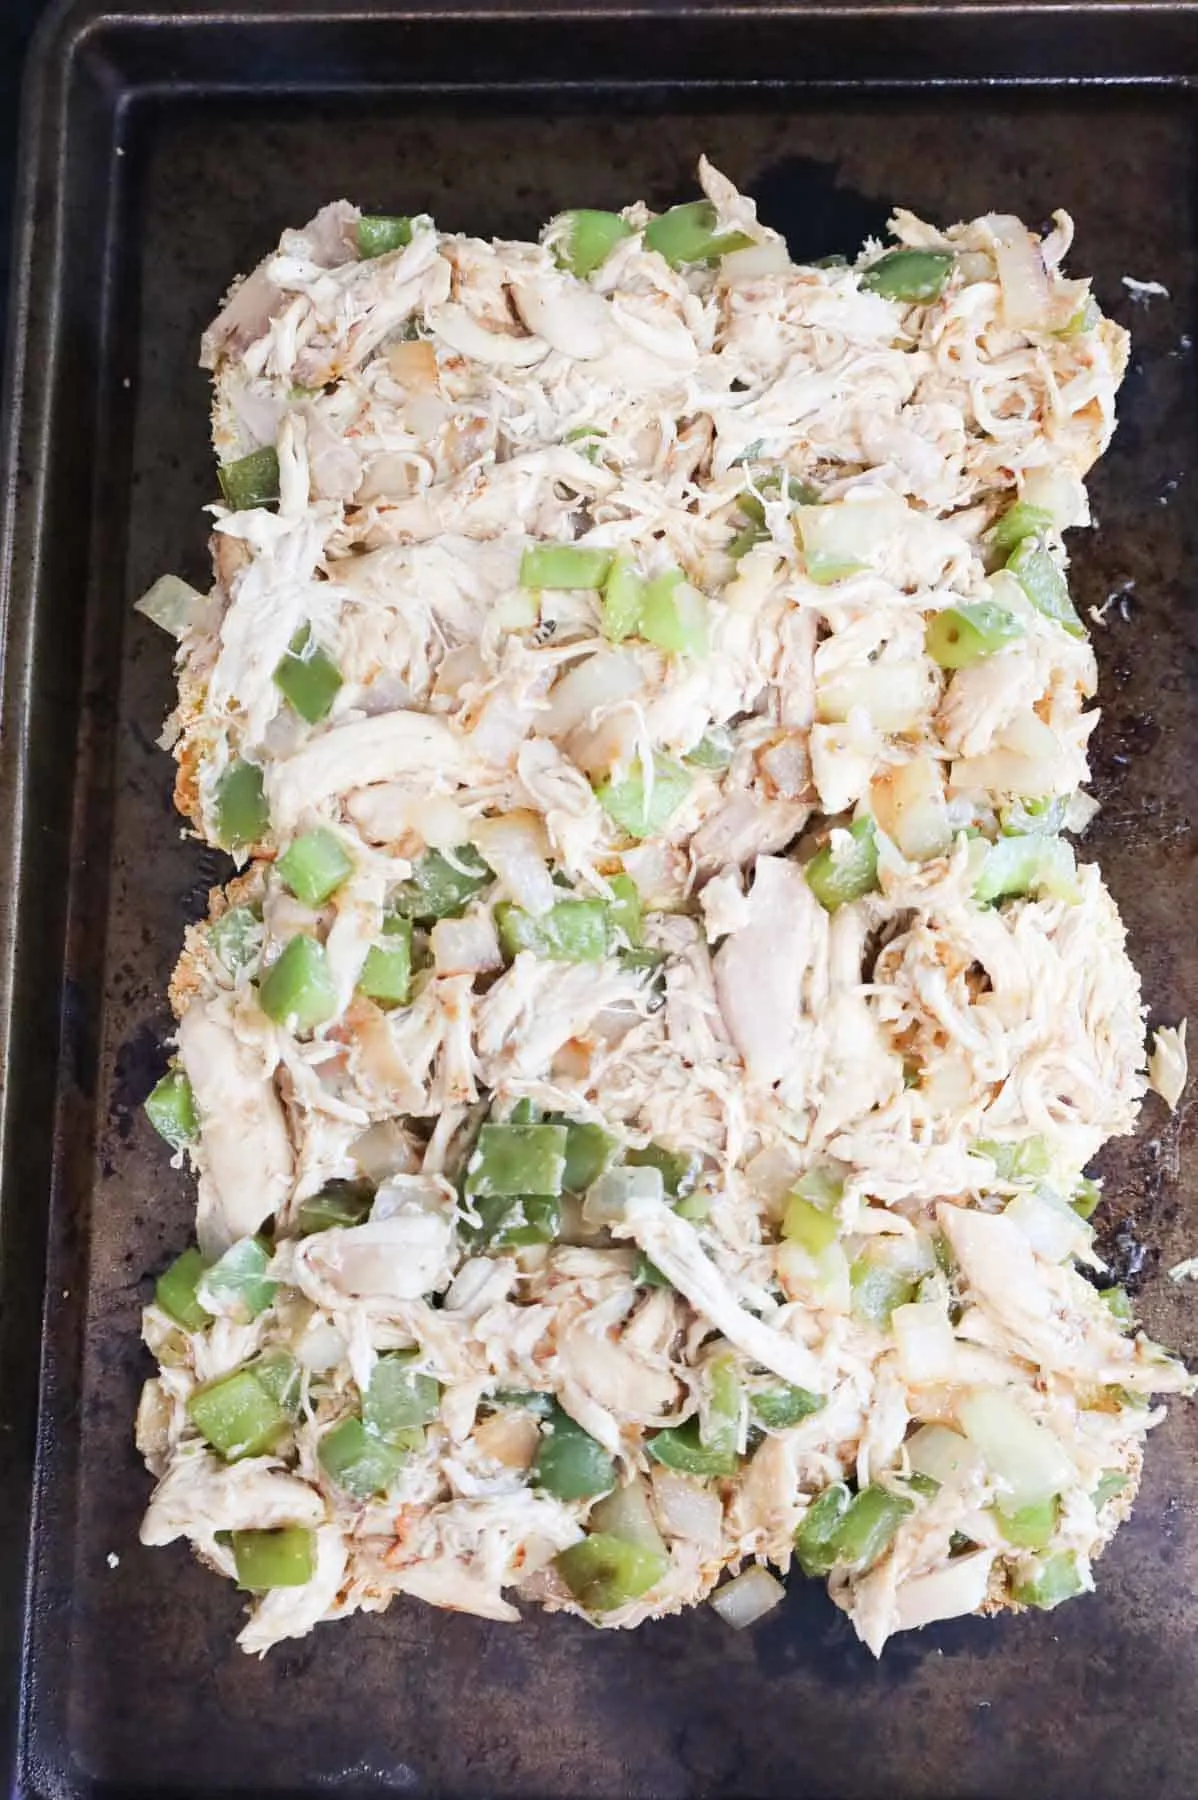 shredded chicken and bell peppers mixture on top of buns on a baking sheet.